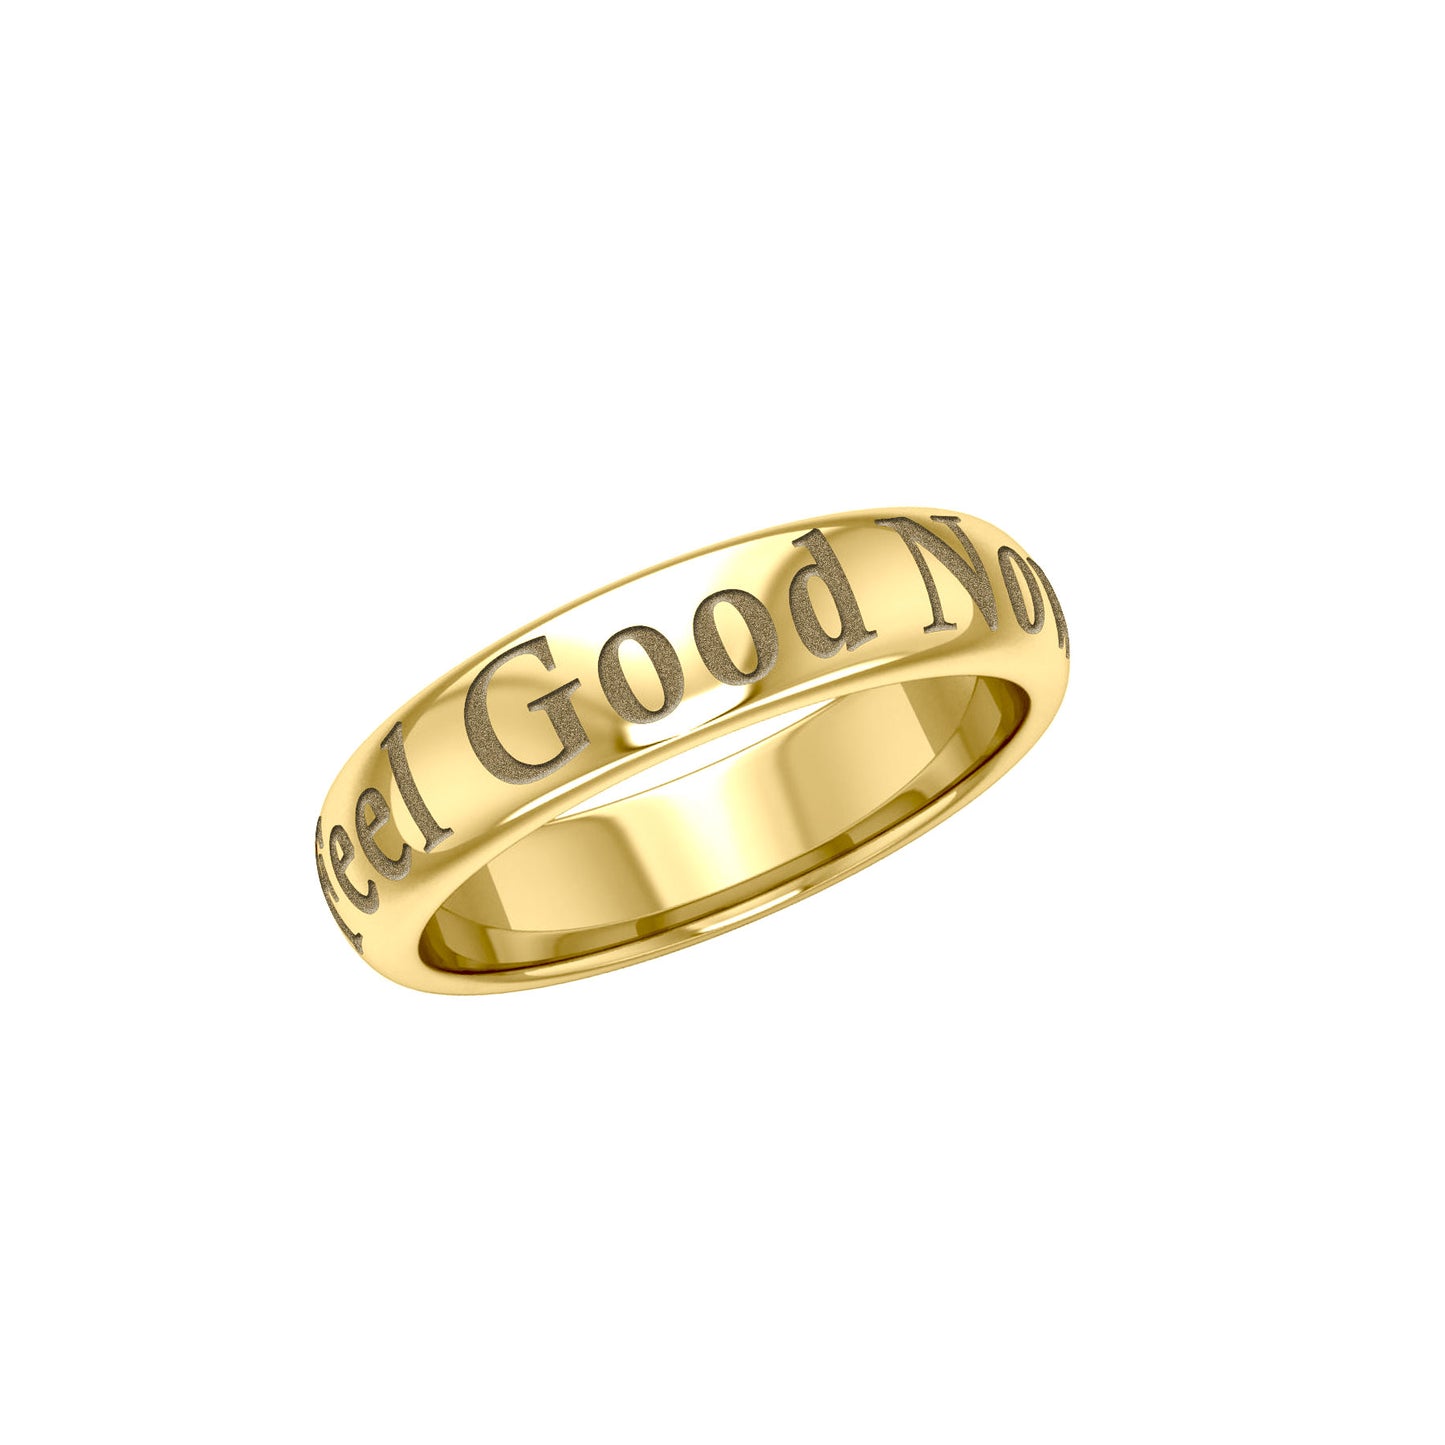 Feel Good Now Gold Vermeil Plate on Silver Band Ring VRI1096